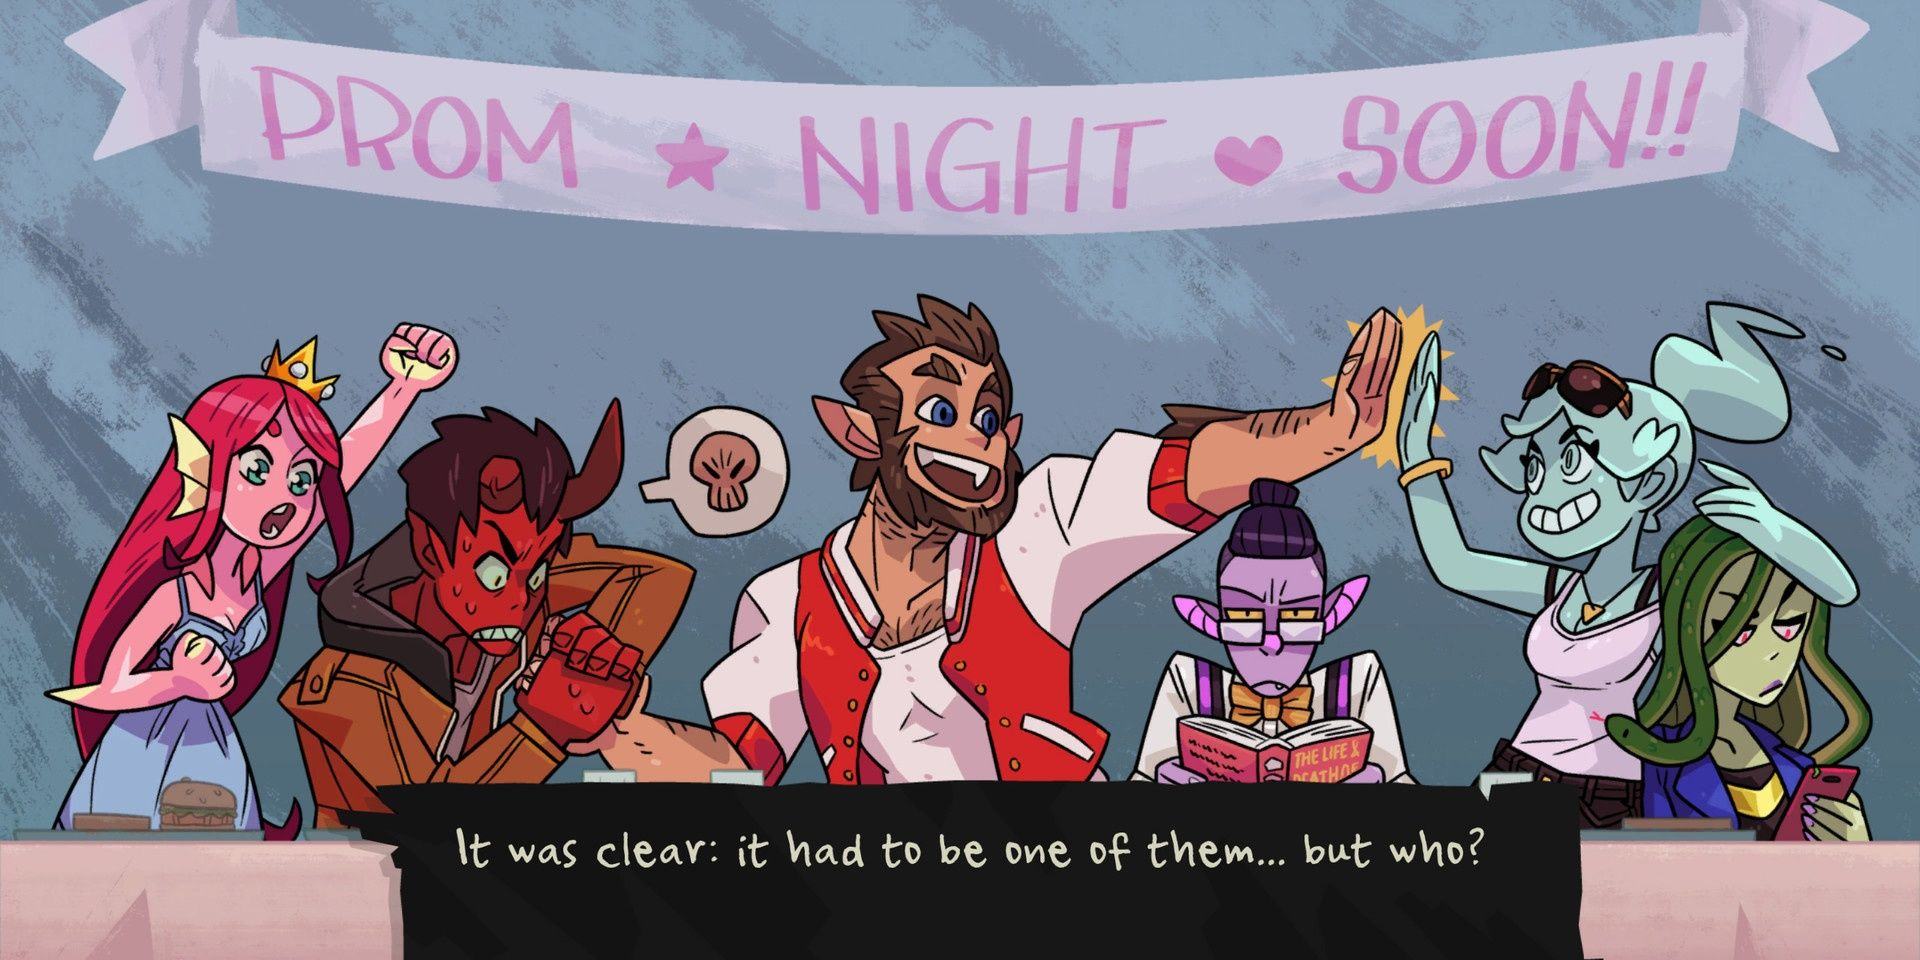 Monsters from the Monster Prom game underneath a banner that reads PROM NIGHT SOON!!